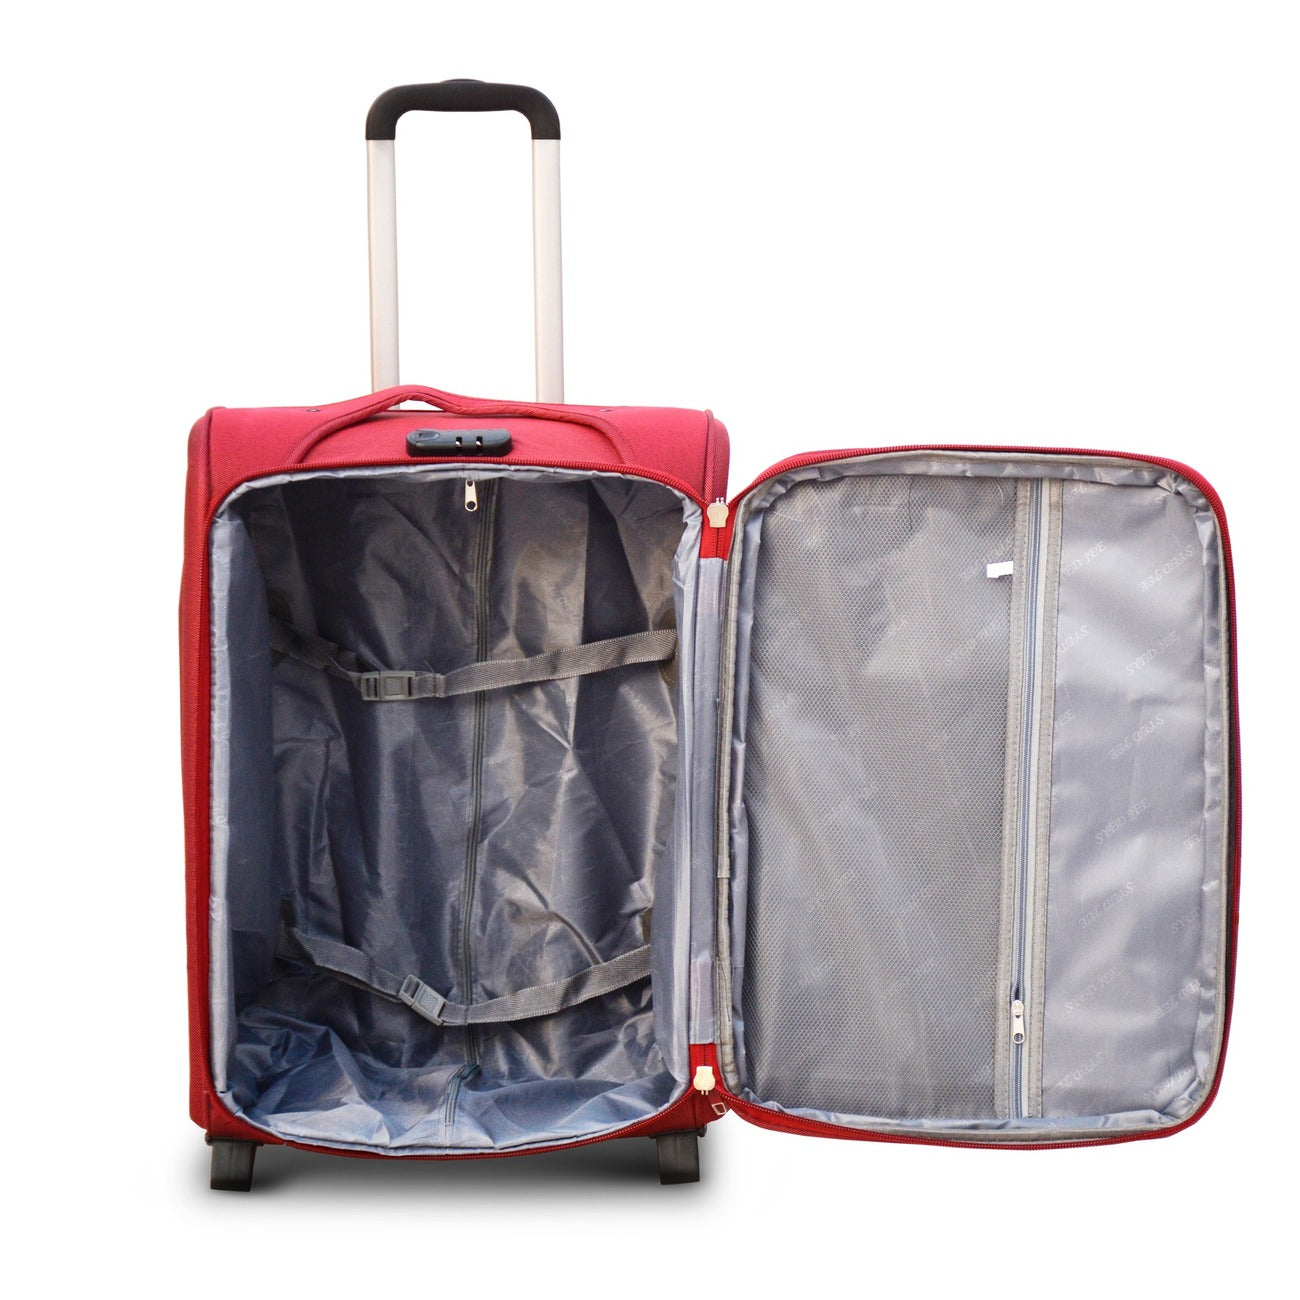 20" Red Colour SJ JIAN 2 Wheel Luggage Lightweight Soft Material Carry On Trolley Bag